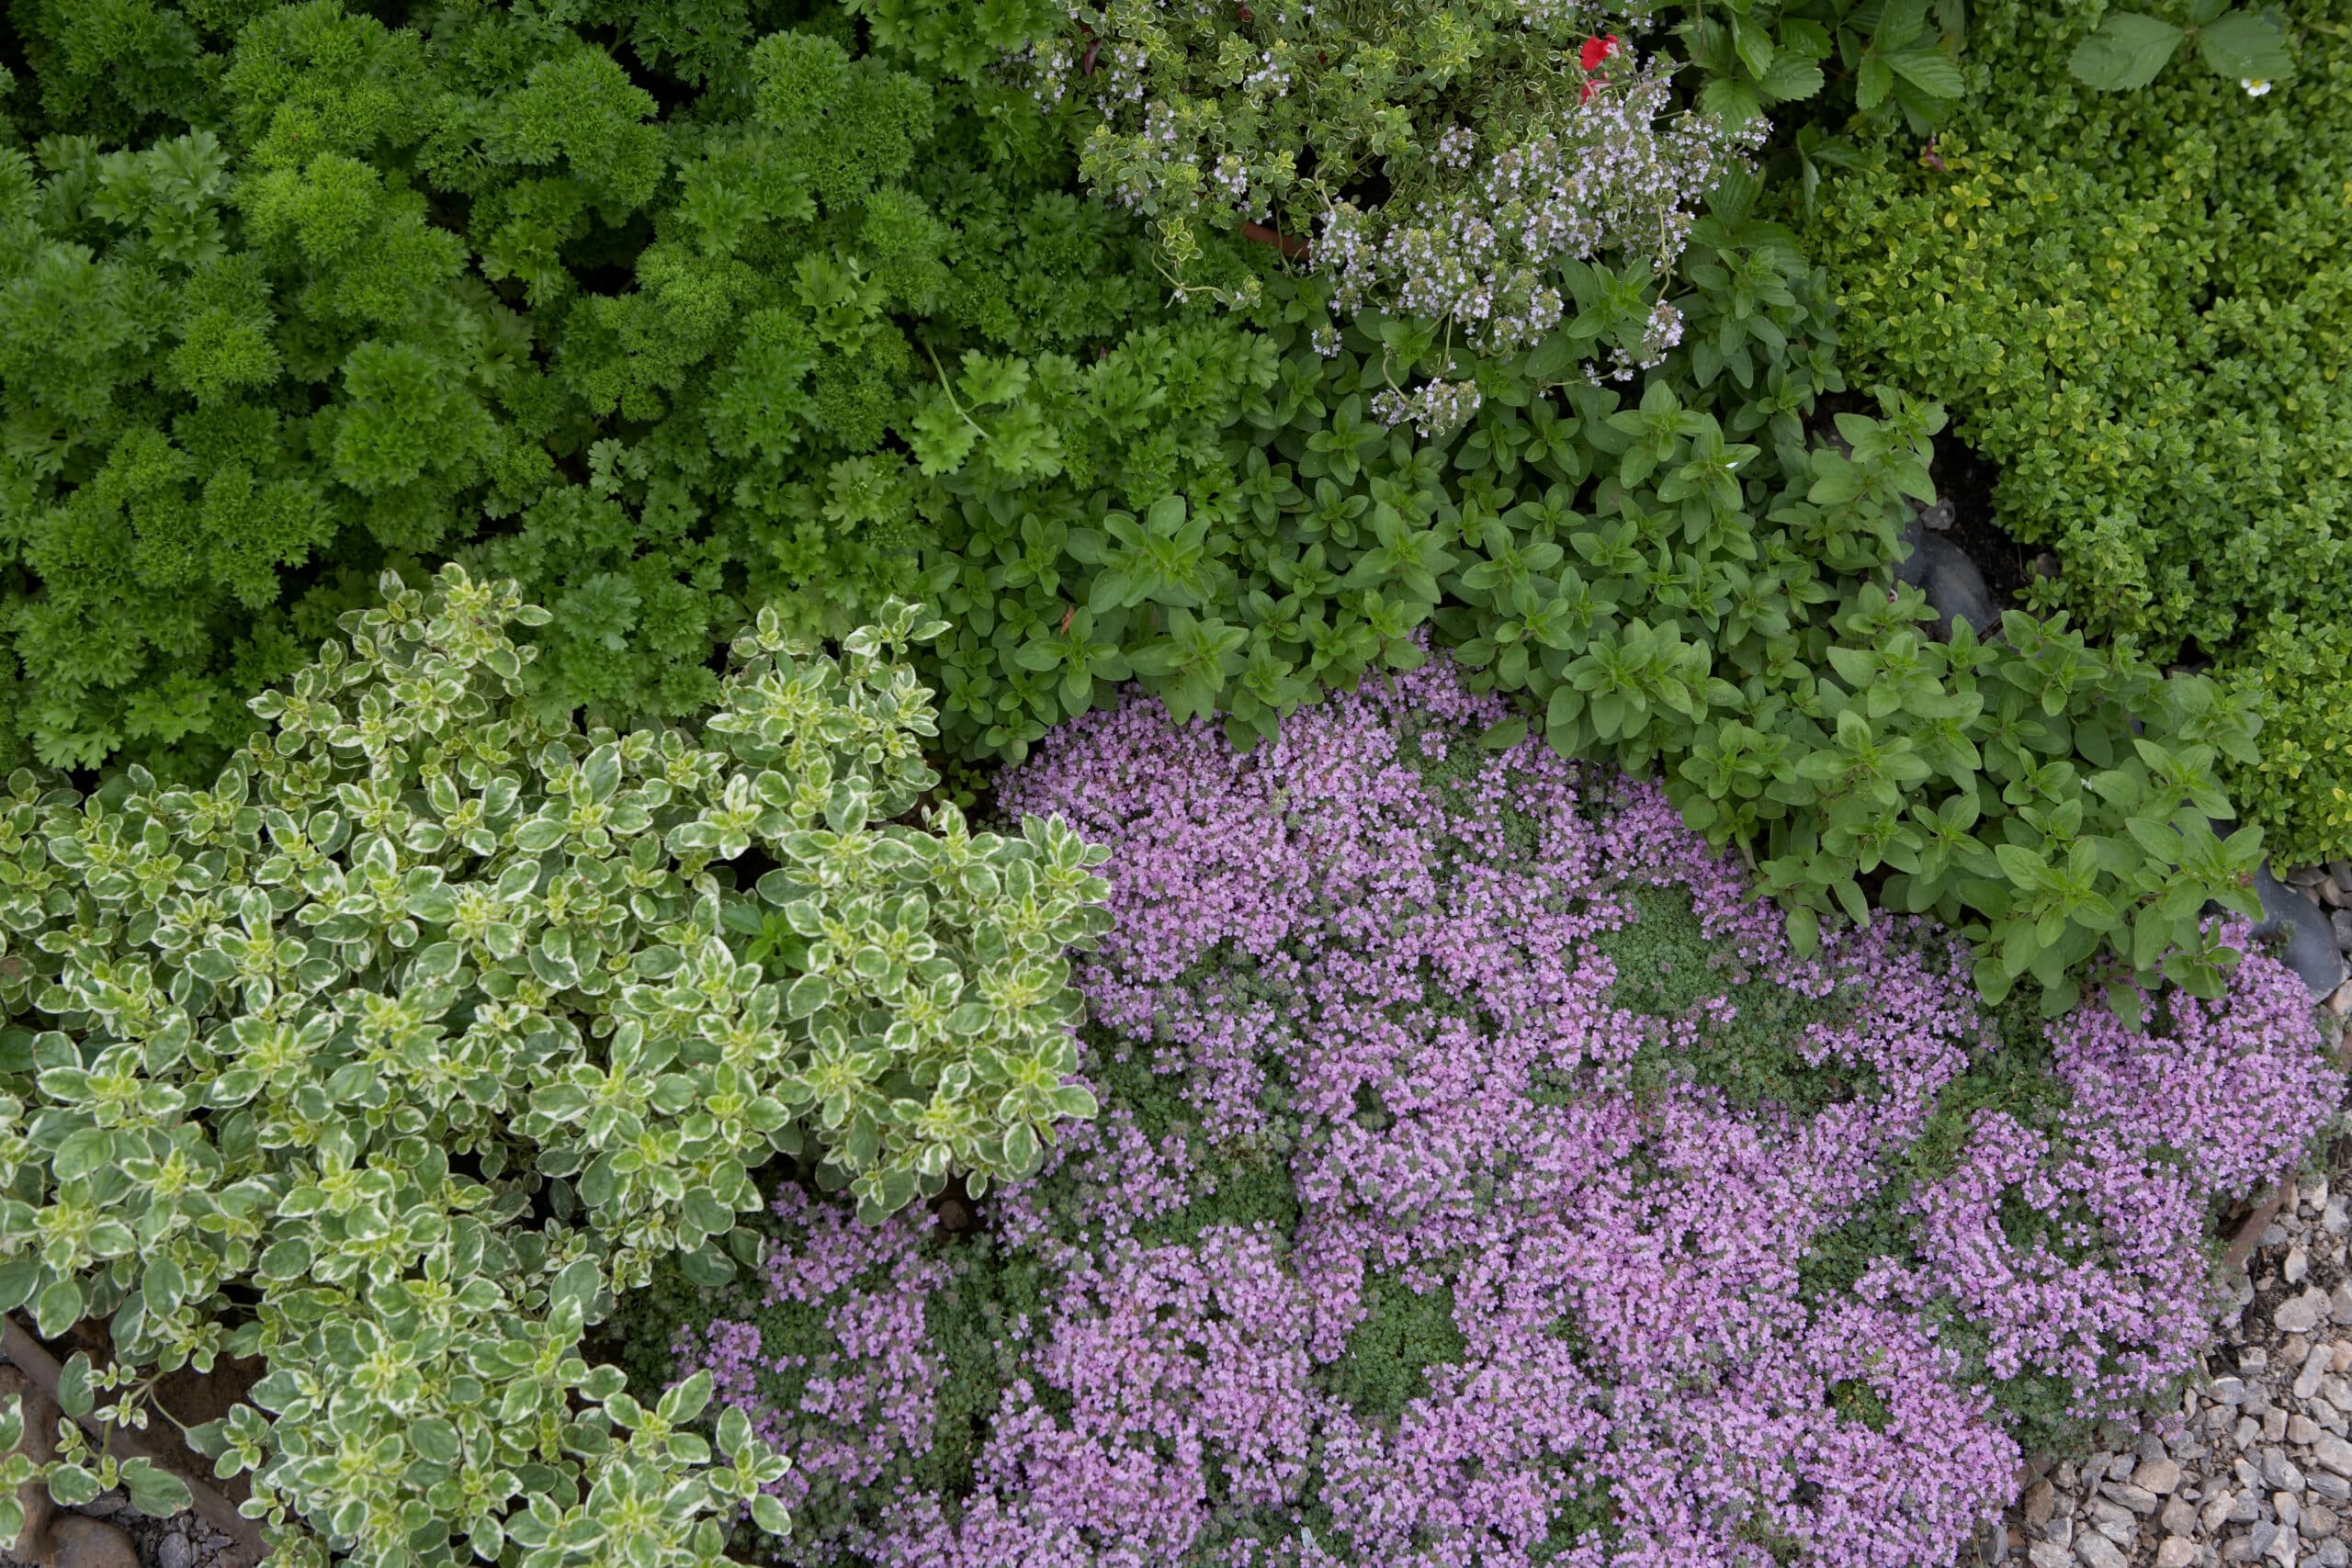 Mint, parsley and various thyme plants in the 'Growing Tastes Allotment Garden' - RHS Hampton Court Flower Show 2009